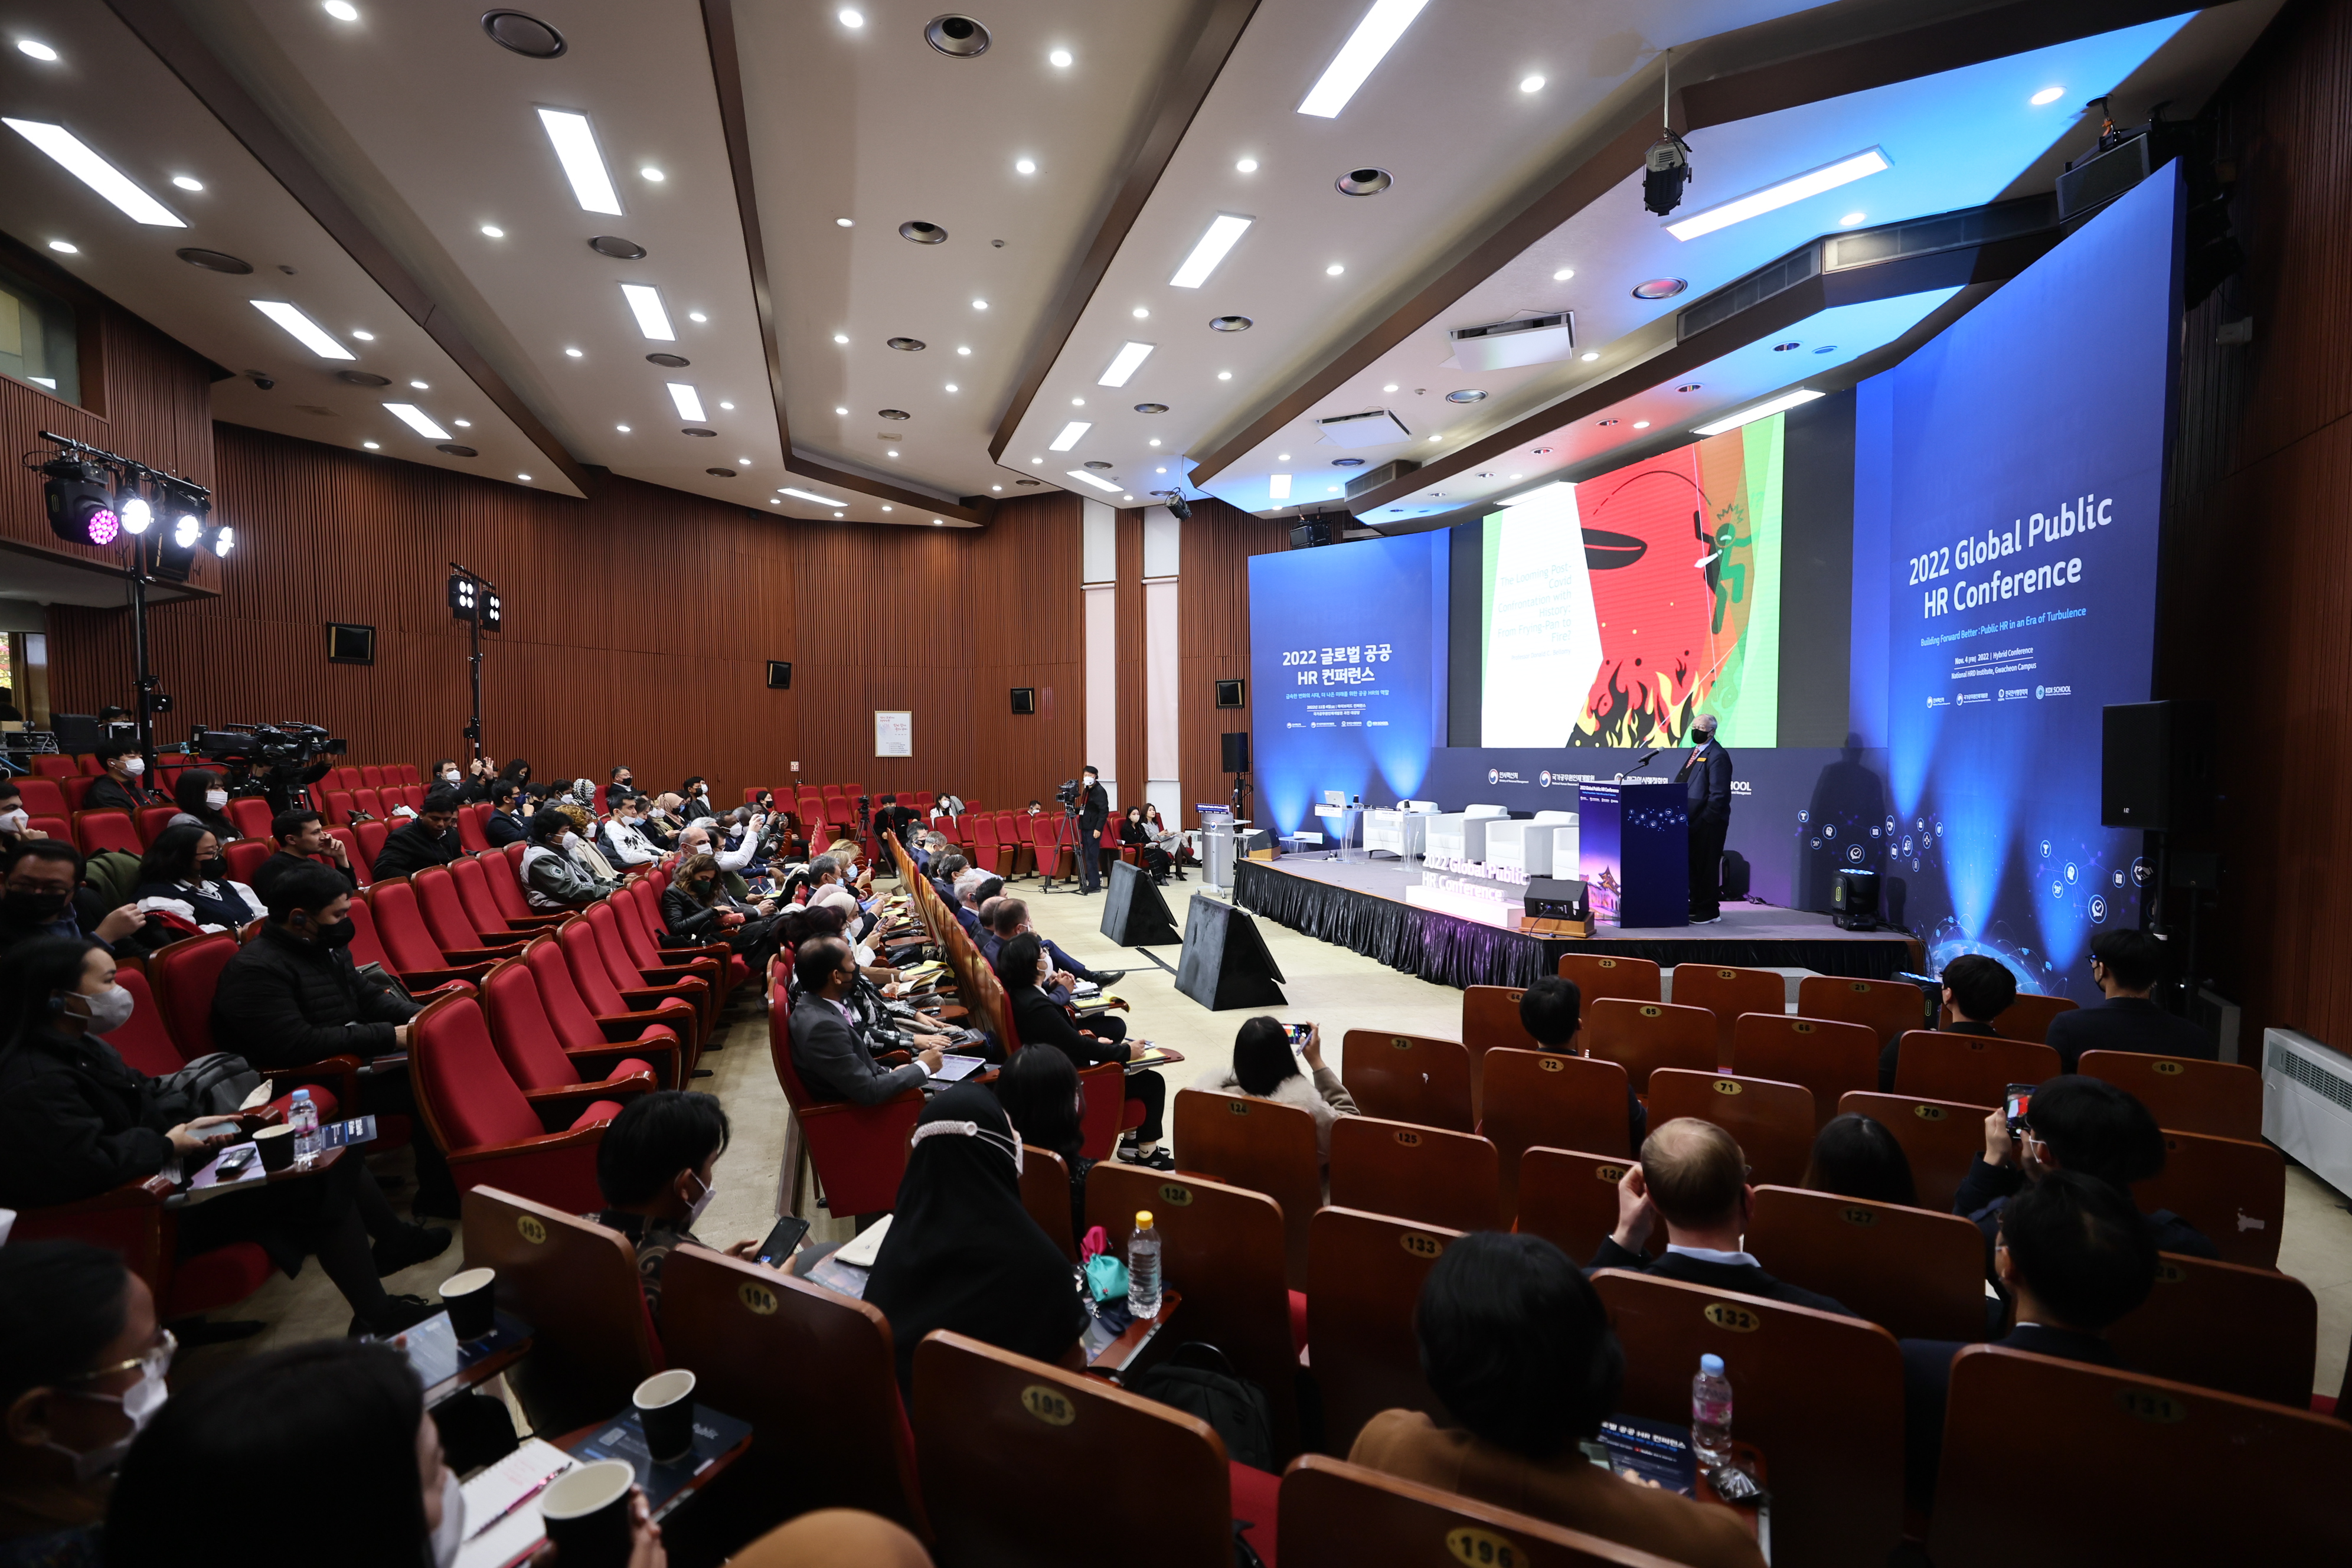 The NHI held the '2022 Global Public HR Conference' in parallel, both on-line and off-line on 4th November.  HR experts in and outside of Korea, including those from international organizations, governments, public organizations, and universities, participated in the conference.